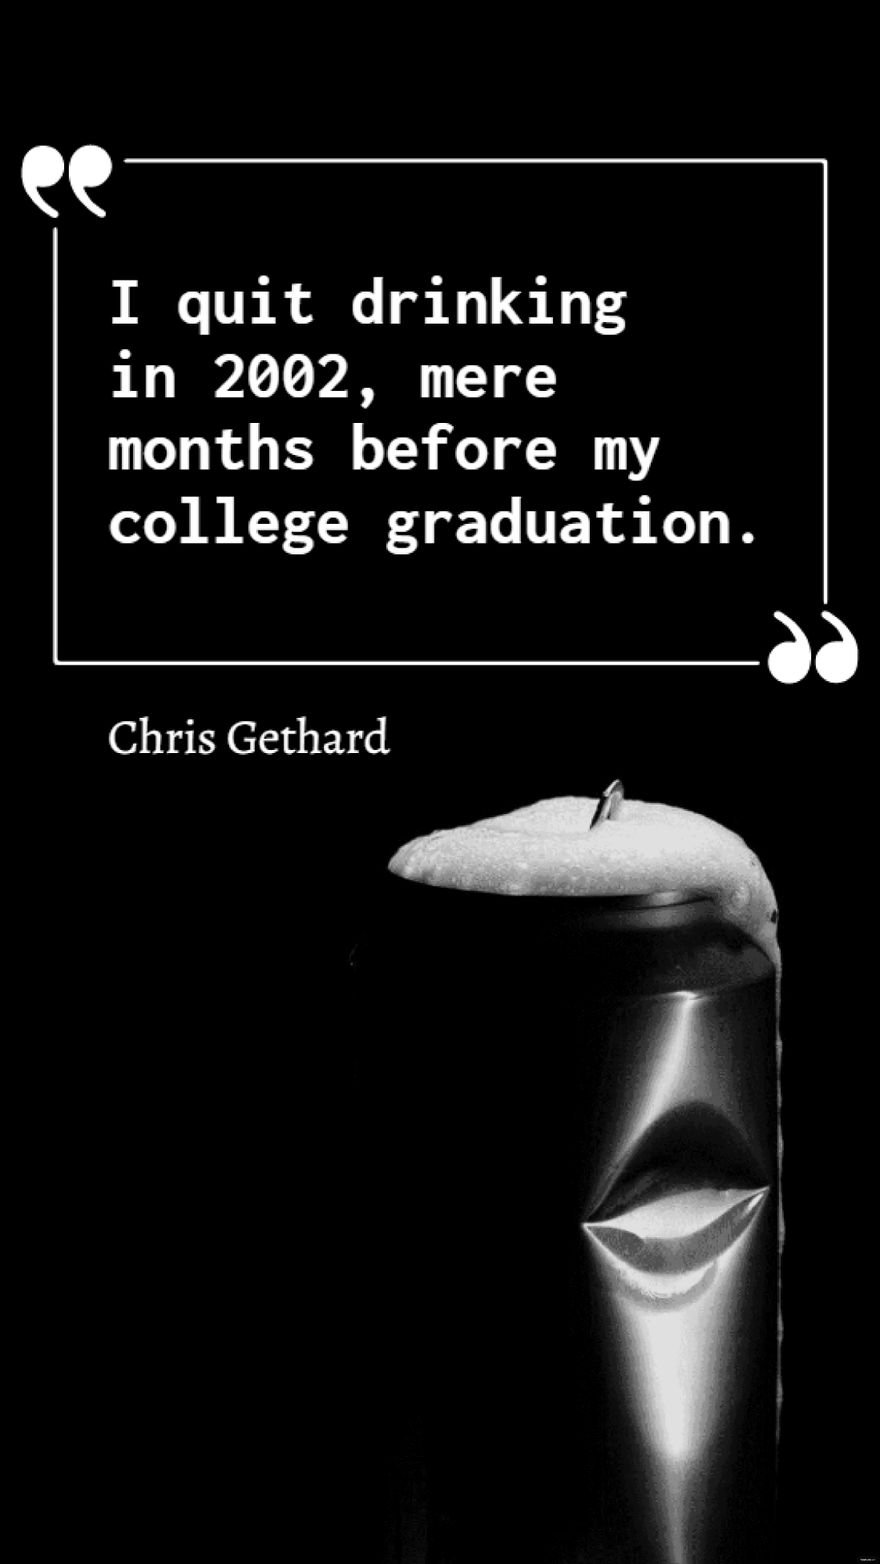 Chris Gethard - I quit drinking in 2002, mere months before my college graduation. in JPG